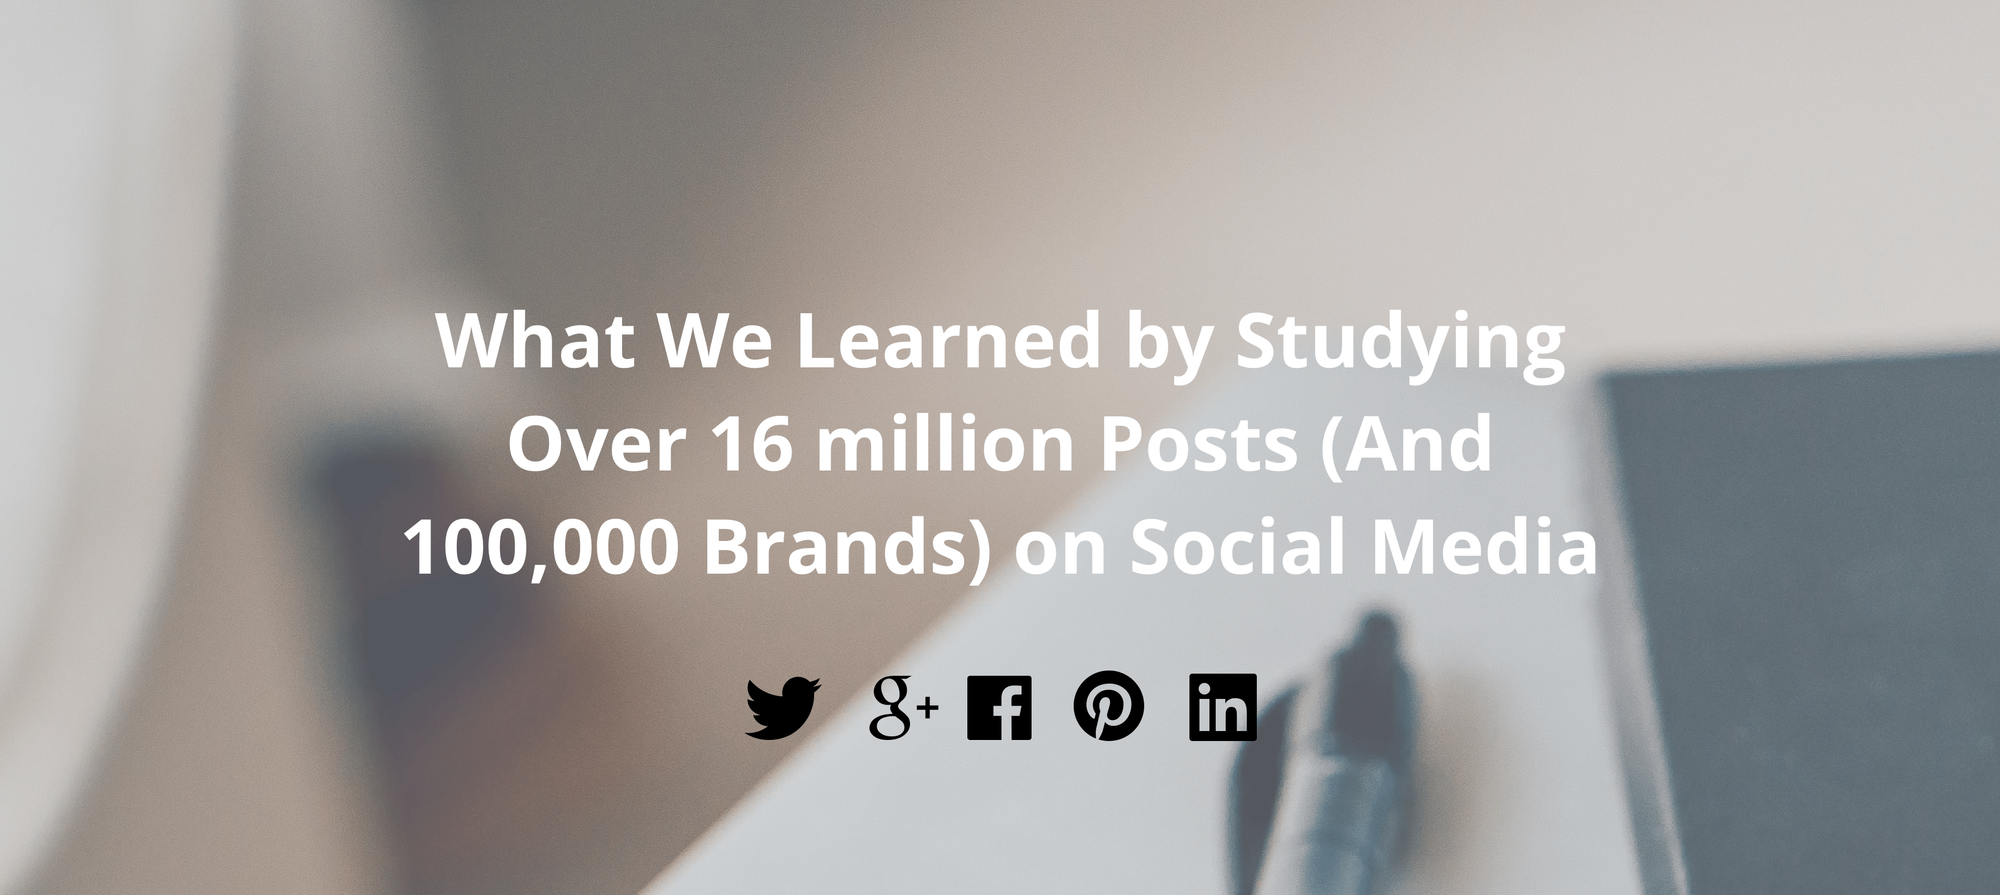 3 Unusual Lessons We Learned by Studying Over 16 million Posts (And 100,000 Brands) on Social Media